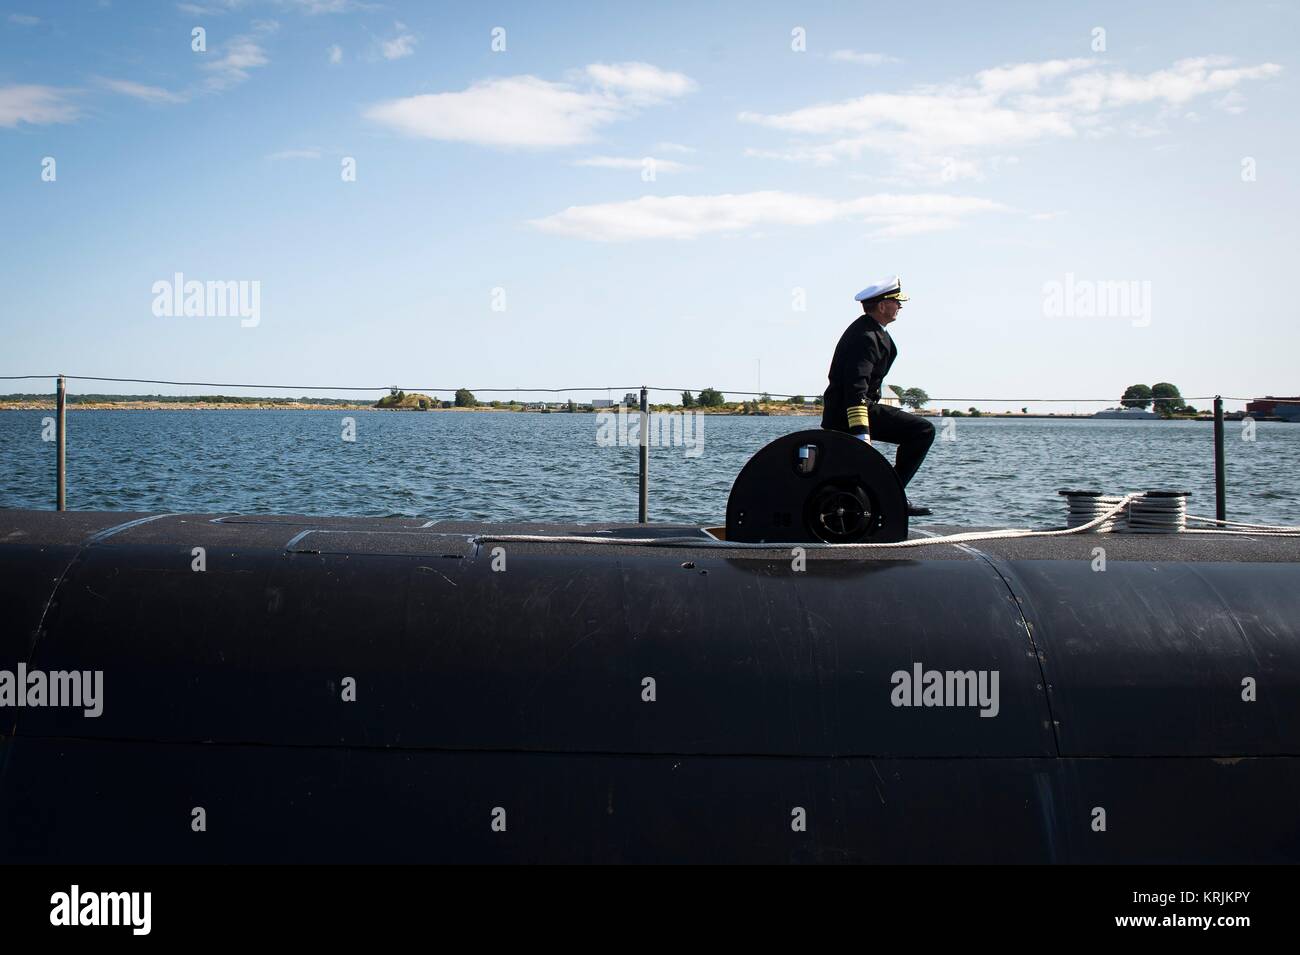 U.S. Navy Chief of Naval Operations Jonathan Greenert tours the Swedish Navy Gotland-class fast-attack submarine HMS Uppland at the Karlskrona Naval Base July 14, 2015 in Karlskrona, Sweden. Stock Photo